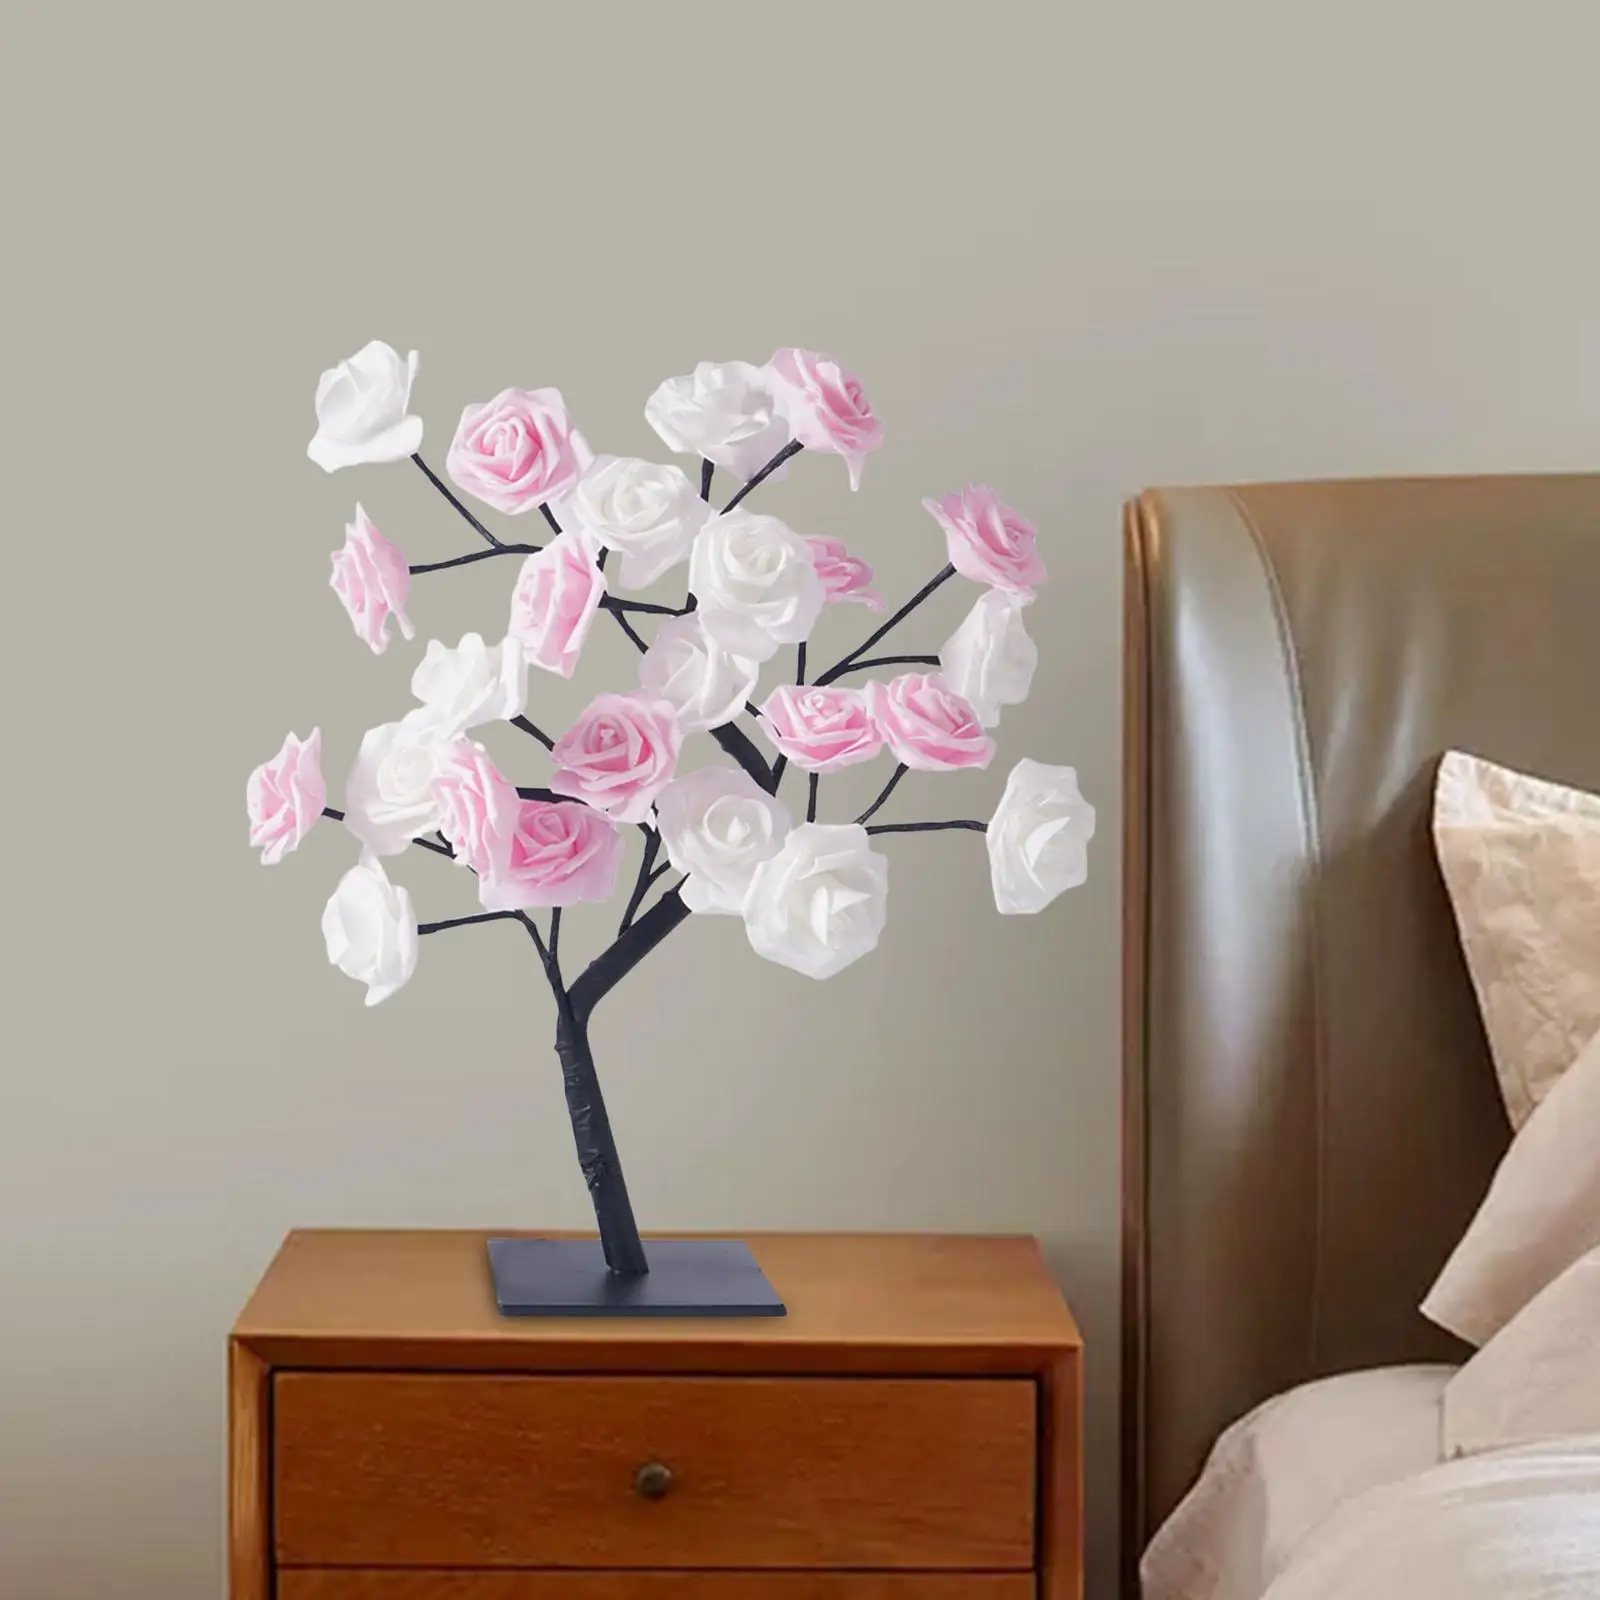 Rose Trees Lamp Night Lights LED Branch Decorative Aesthetic Bedside Flower Lamp for Wedding Bedroom Festival Holiday Birthday